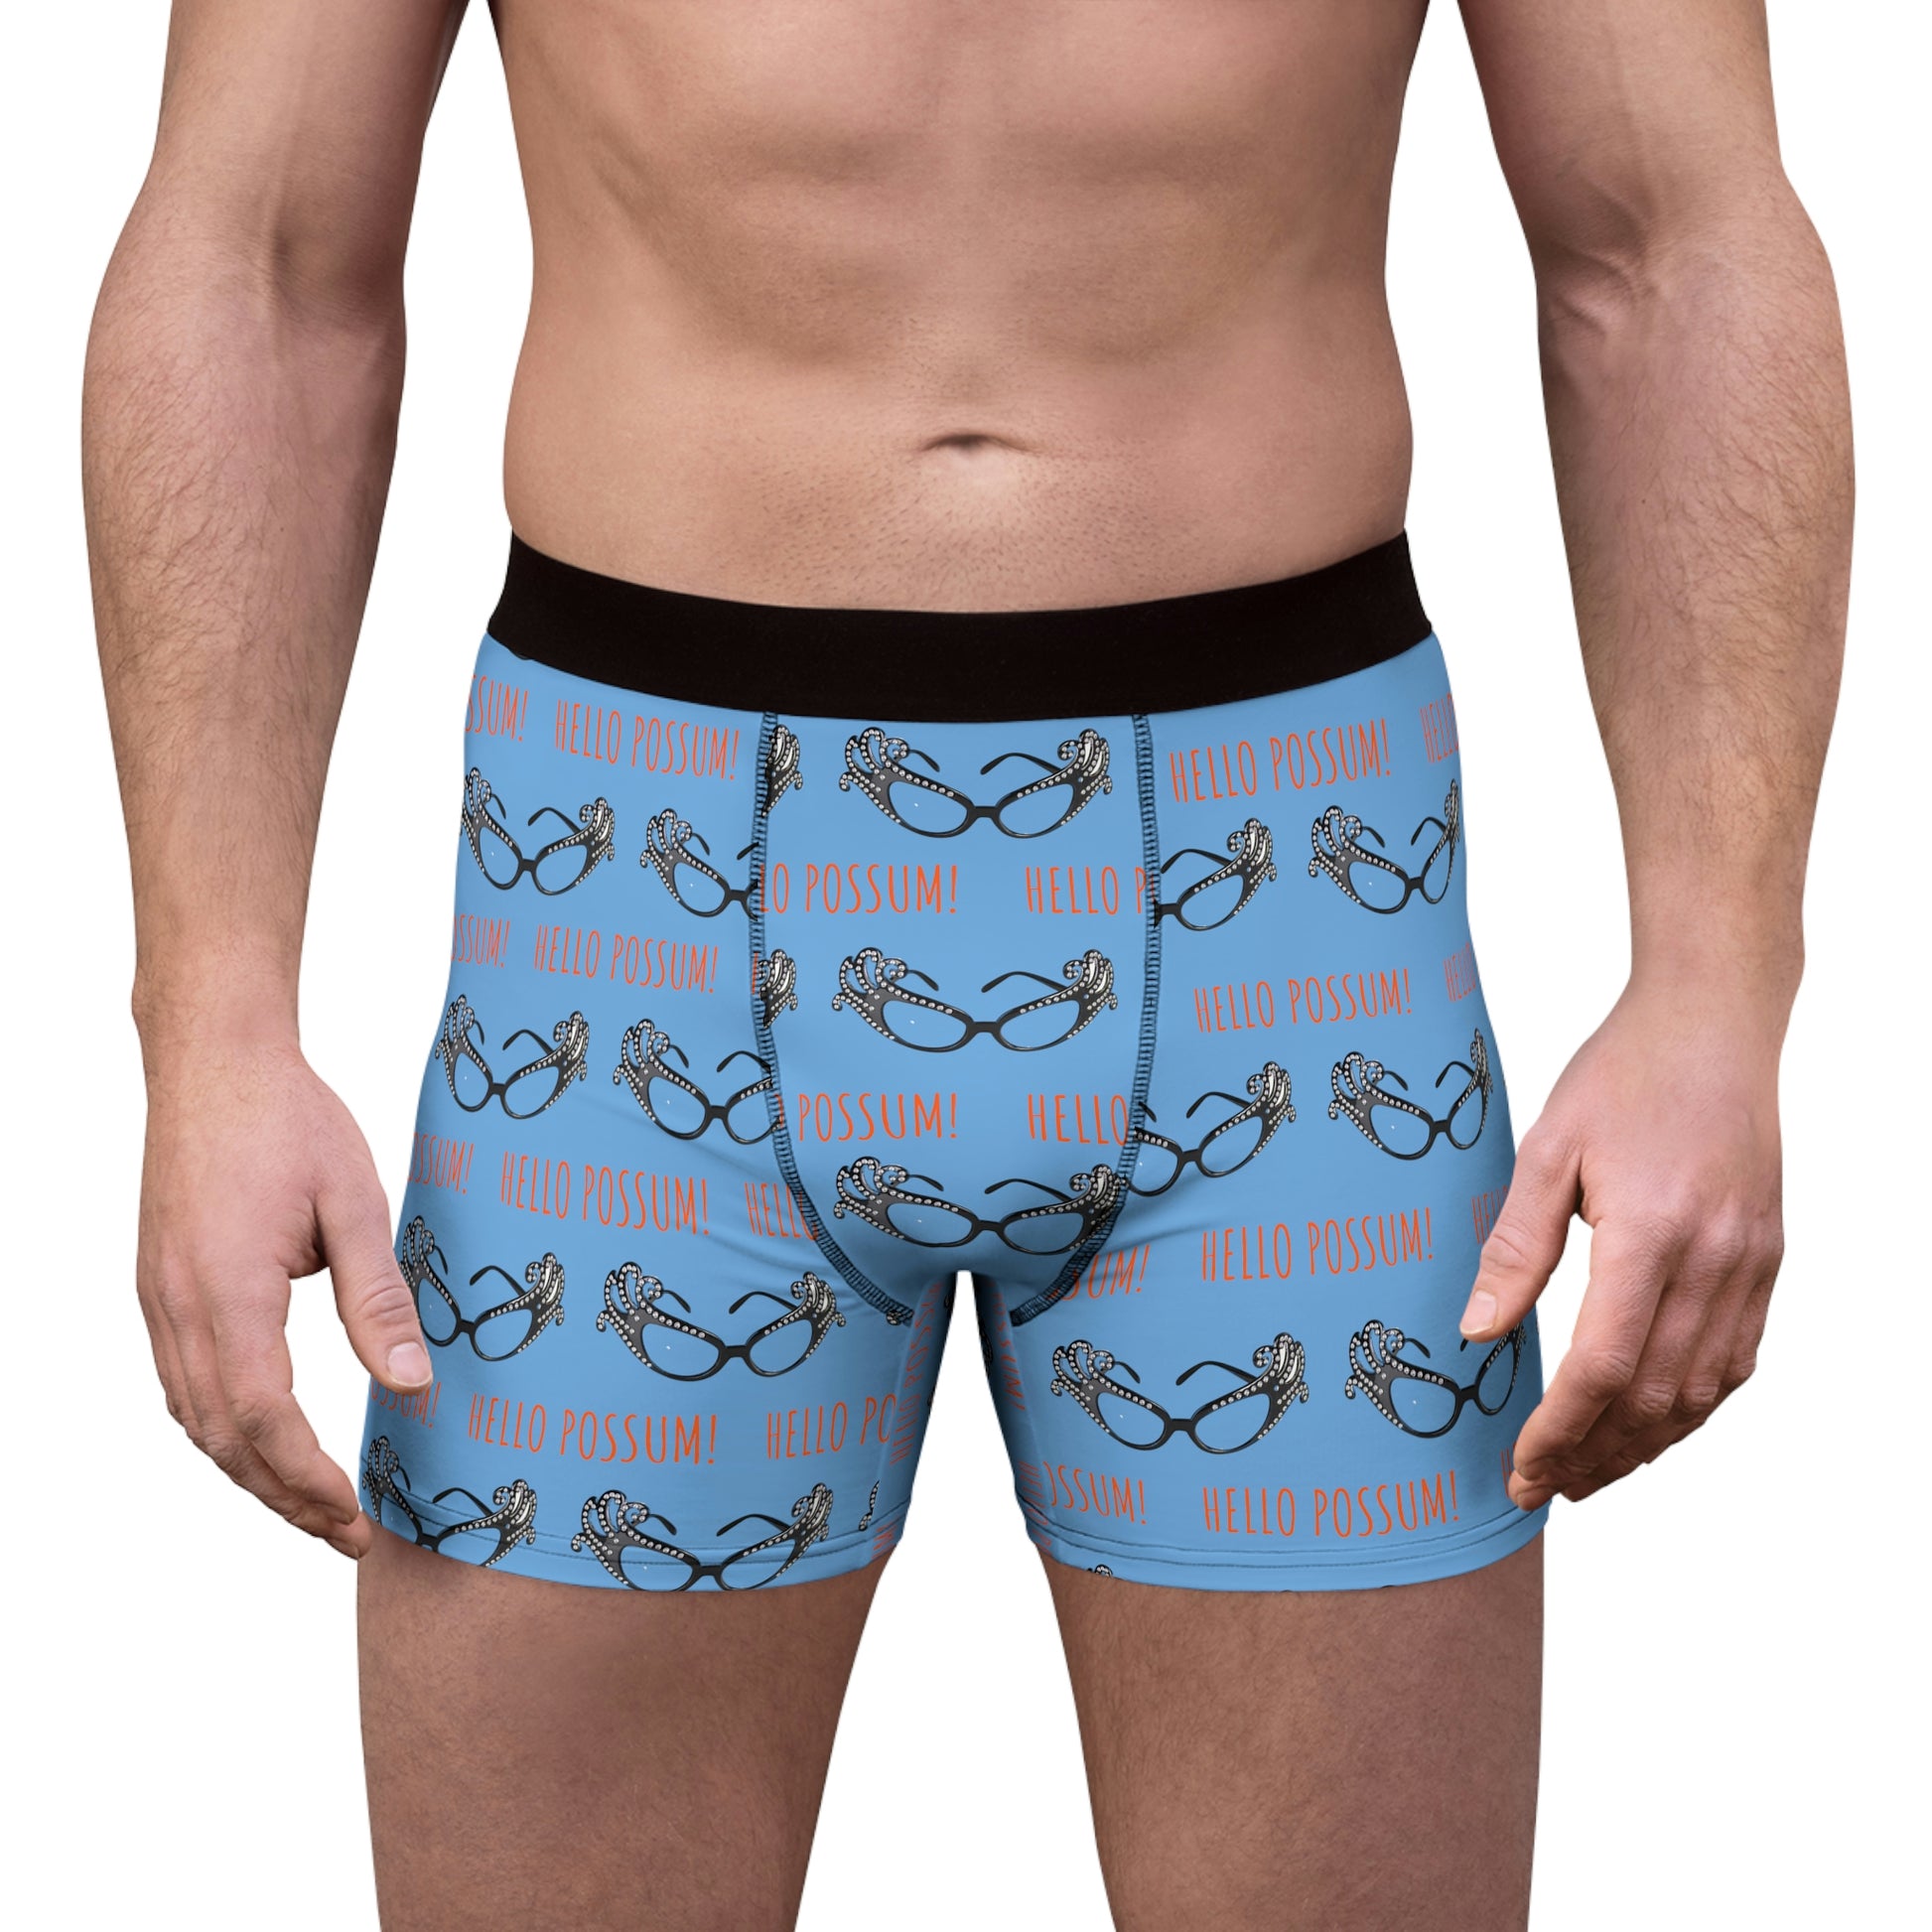 Dame Edna Men's Boxer Briefs. Tribute pair of underwear to the late Barry  Humphries, Hello Possum!